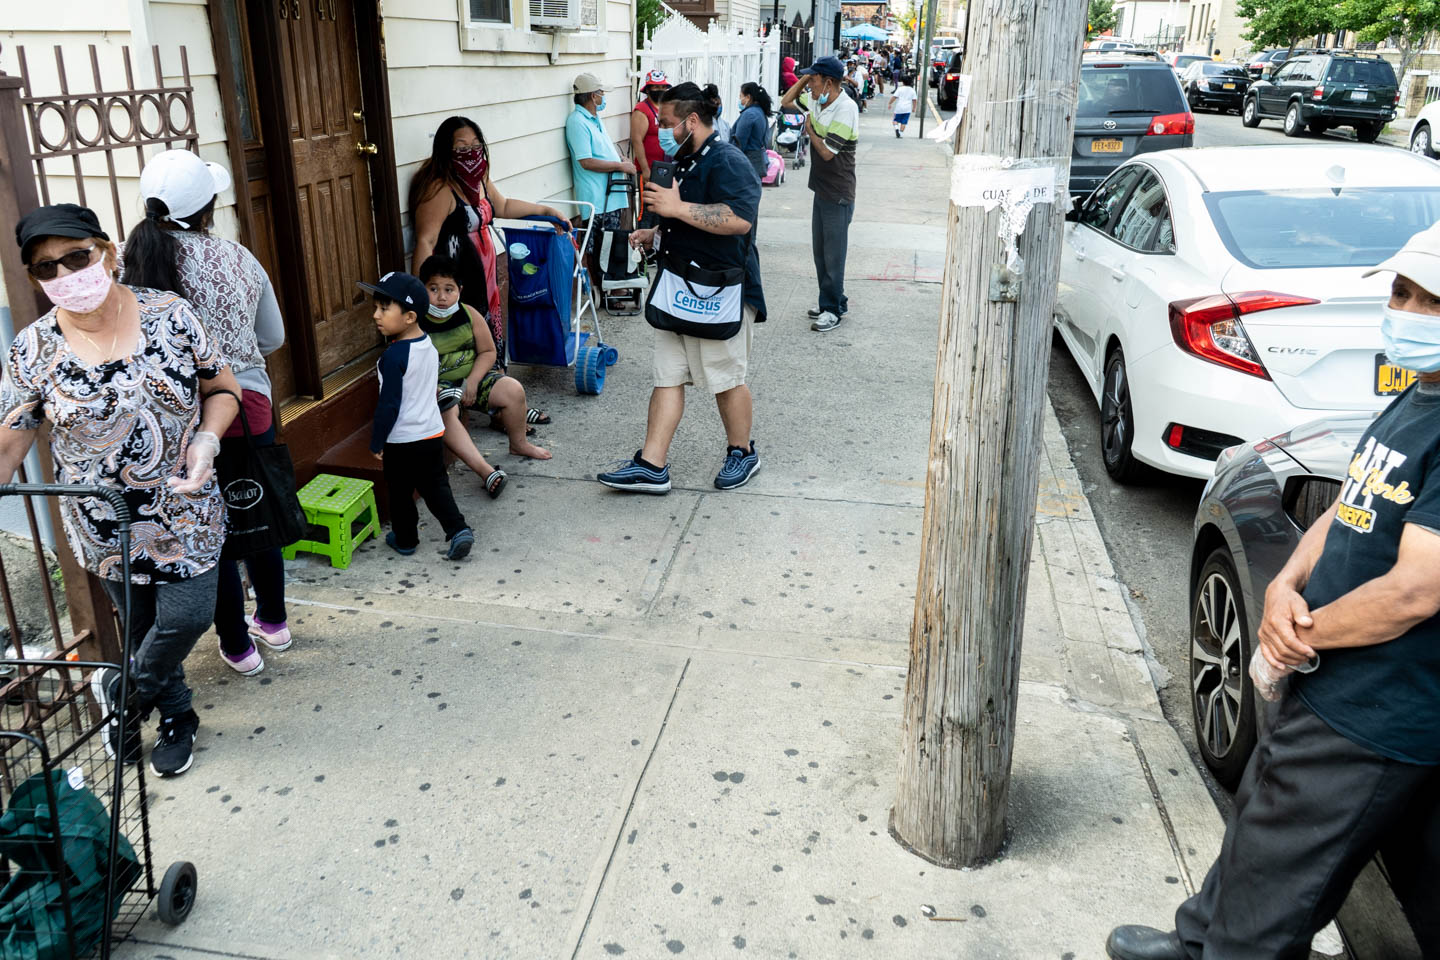 August 17, 2020: Families lining up to get free food, while a U.S. Census worker talks to a woman, her children by her side. Corona Seventh Day Adventist Church, 3530 103rd Street, Queens, New York. © Camilo José Vergara